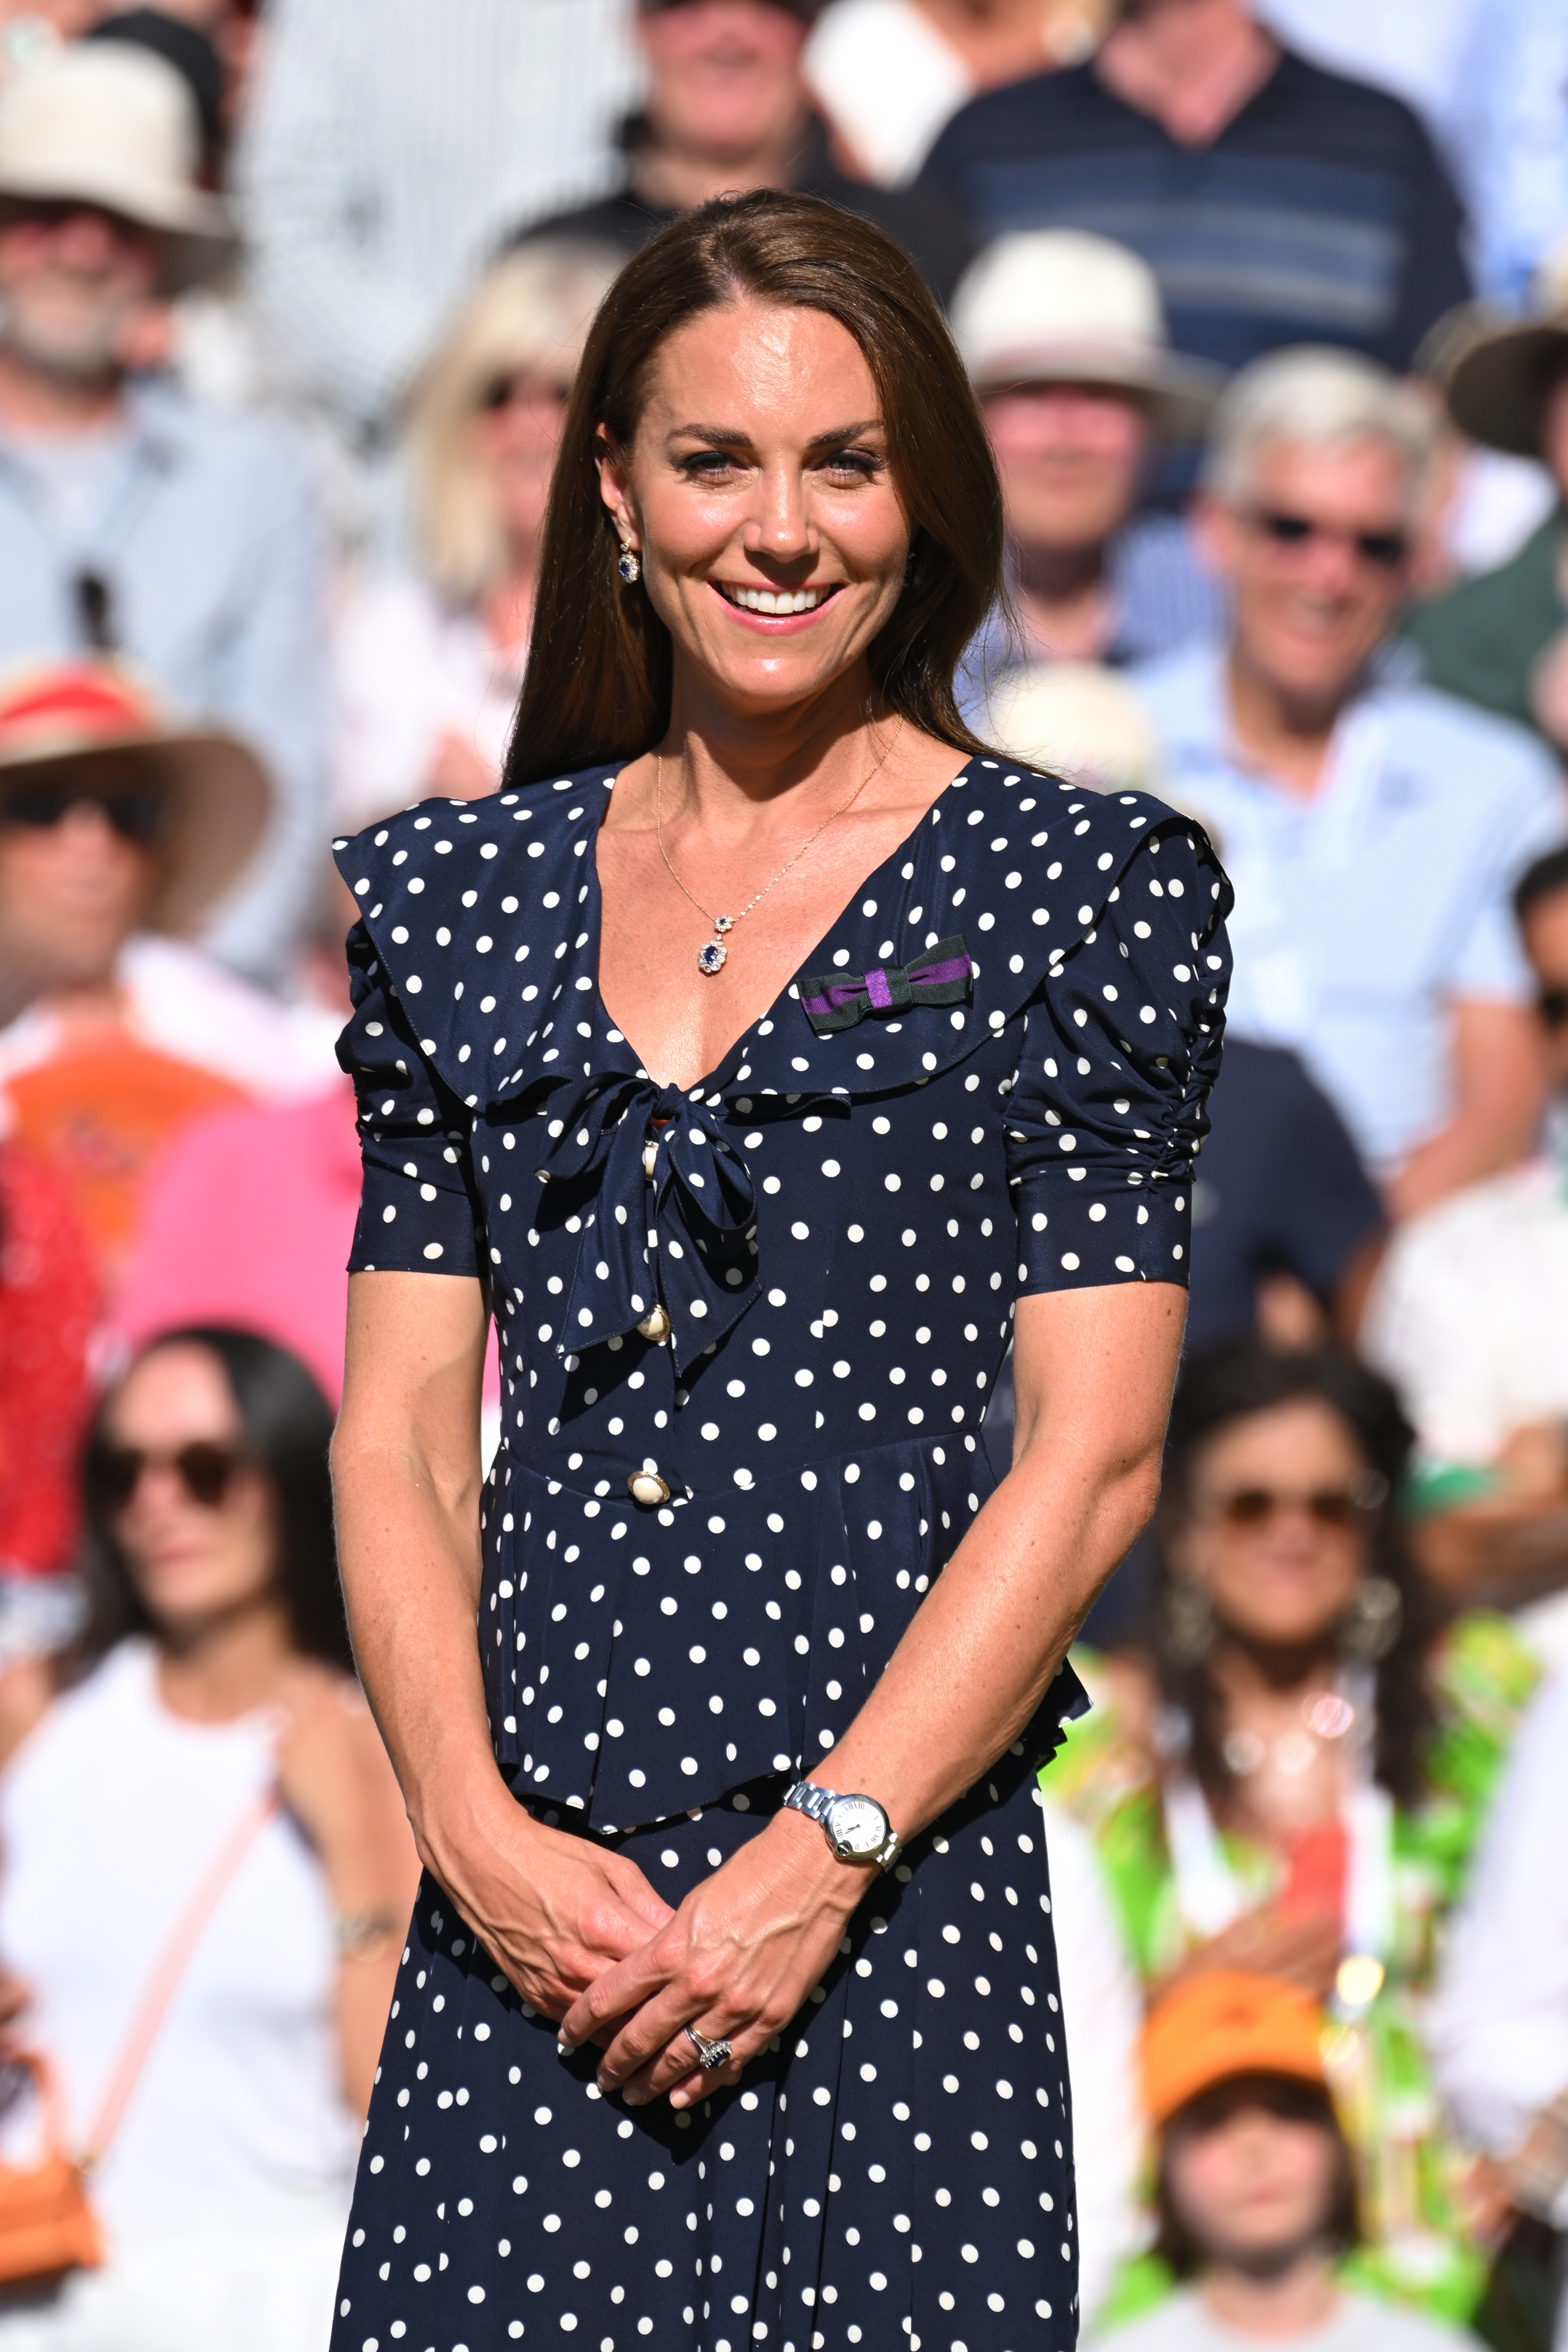 Kate Middleton smiling as she attends The Wimbledon Men's Singles Final